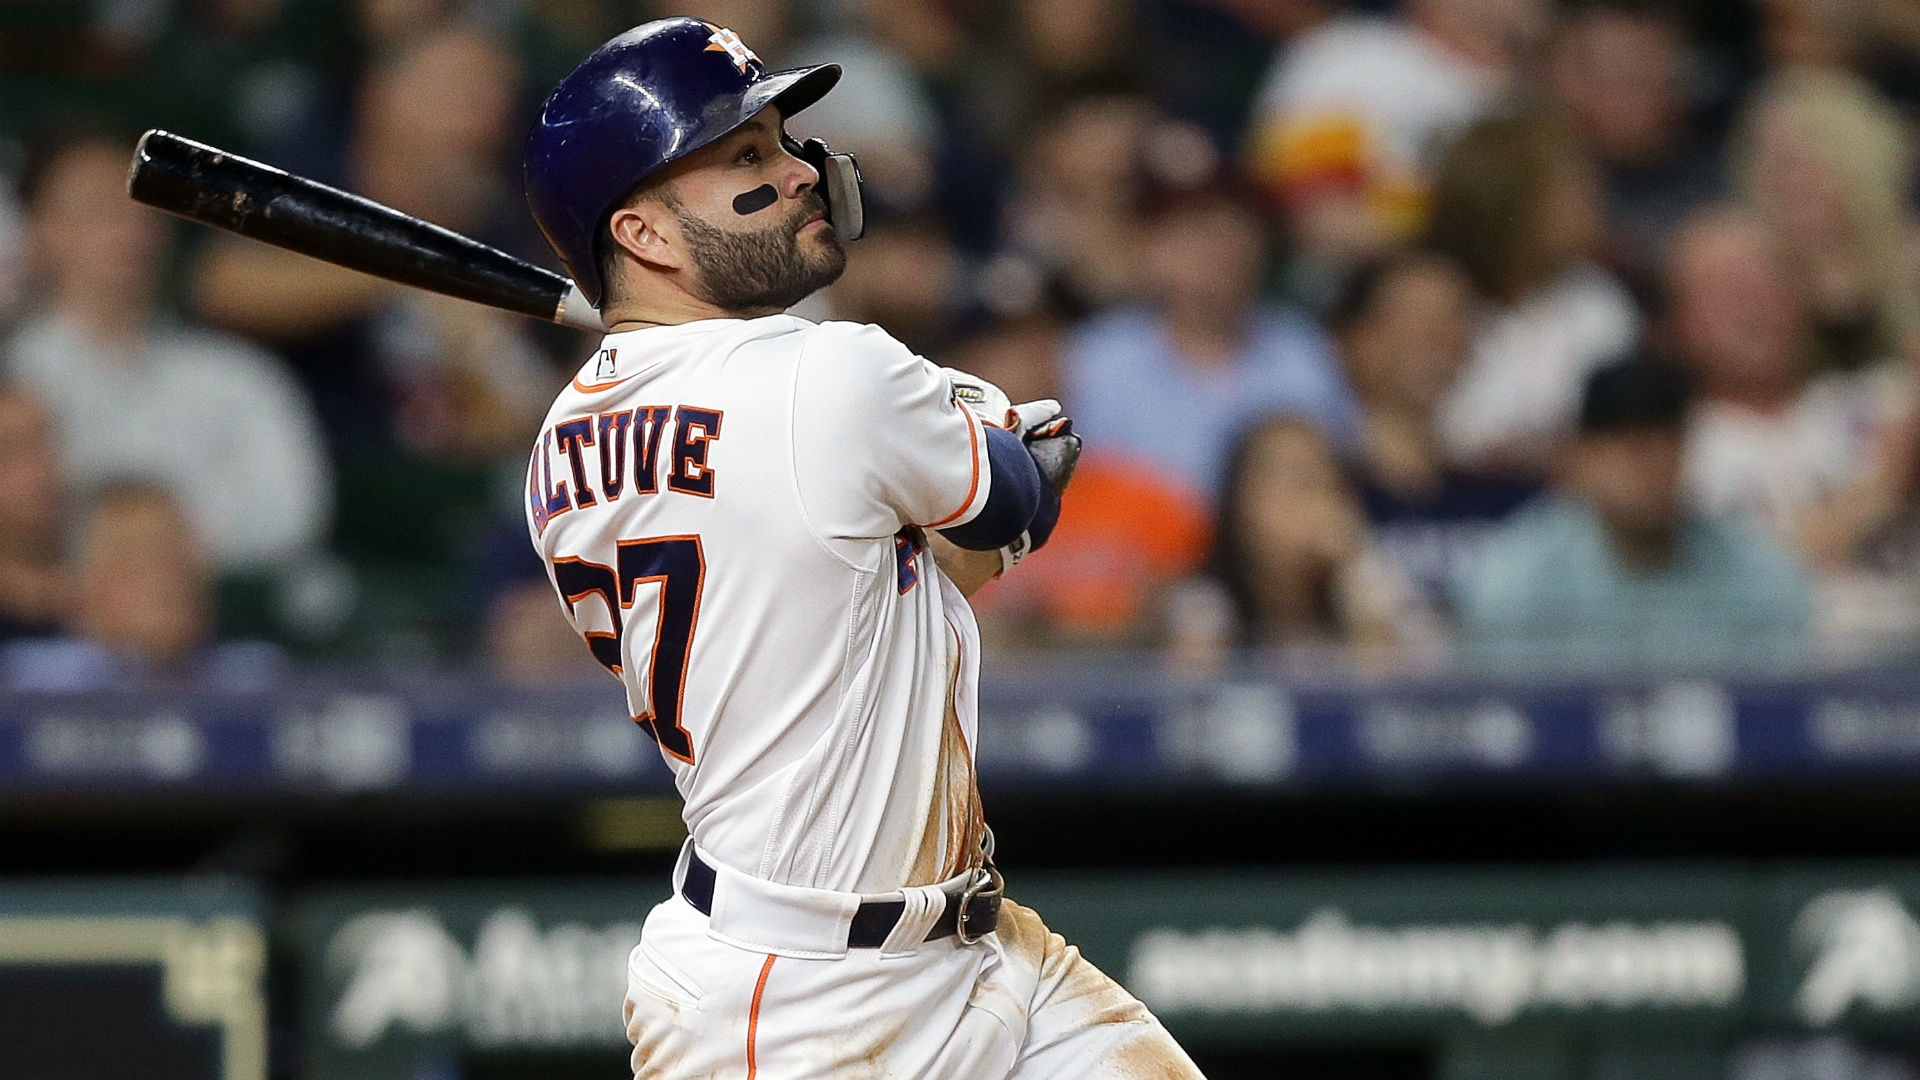 A perfect night for Altuve against the San Francisco Giants